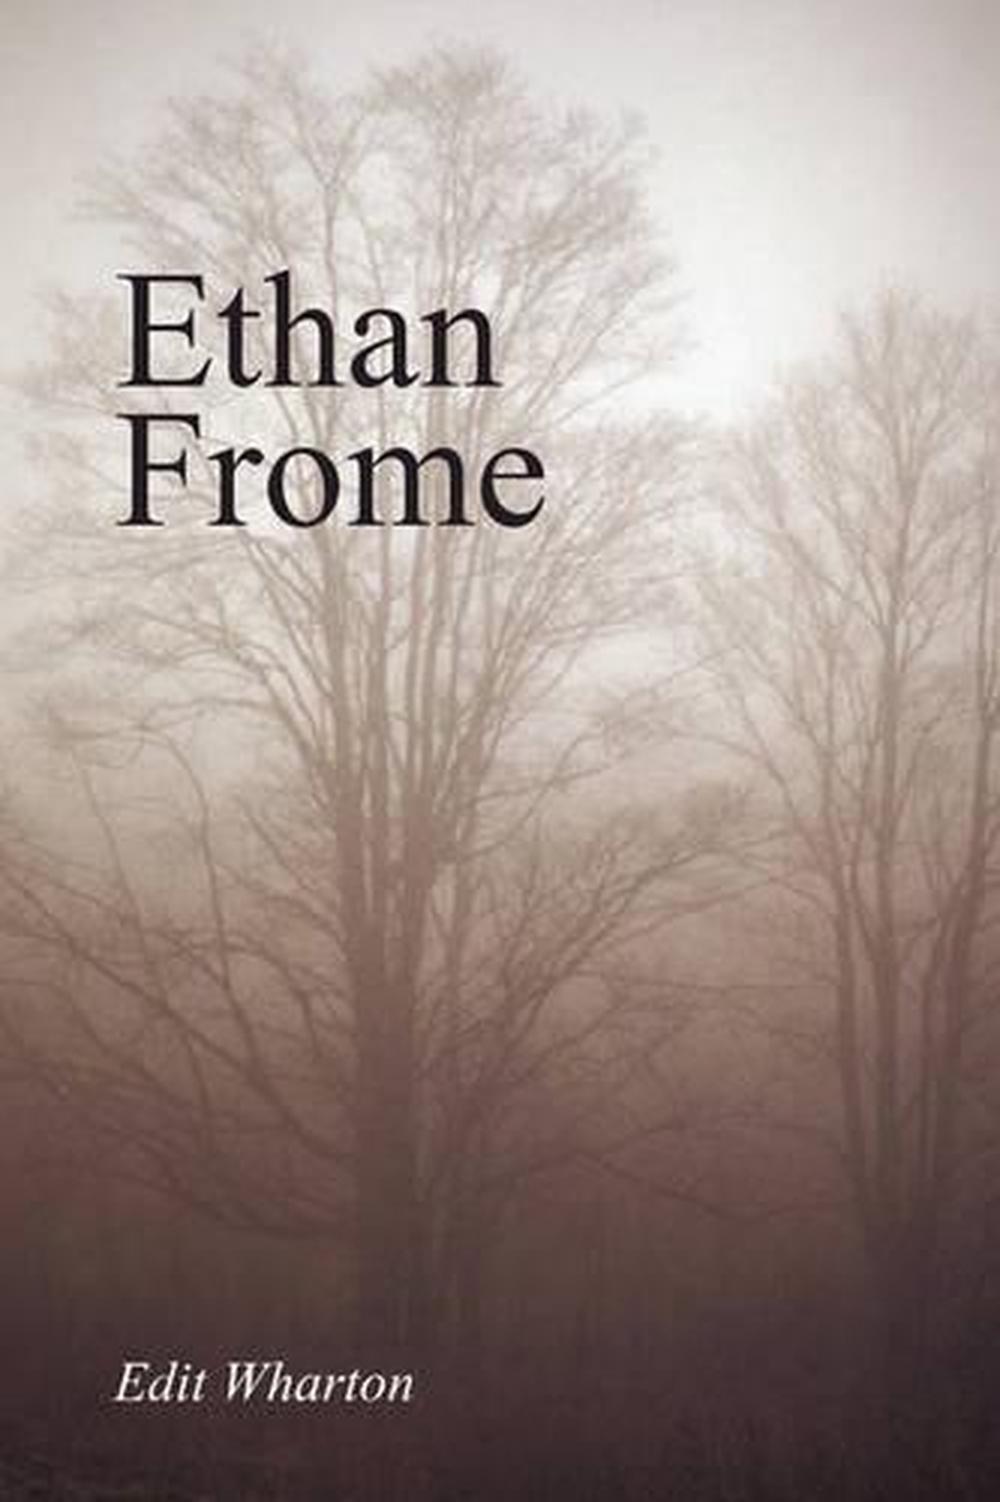 ethan frome book cover